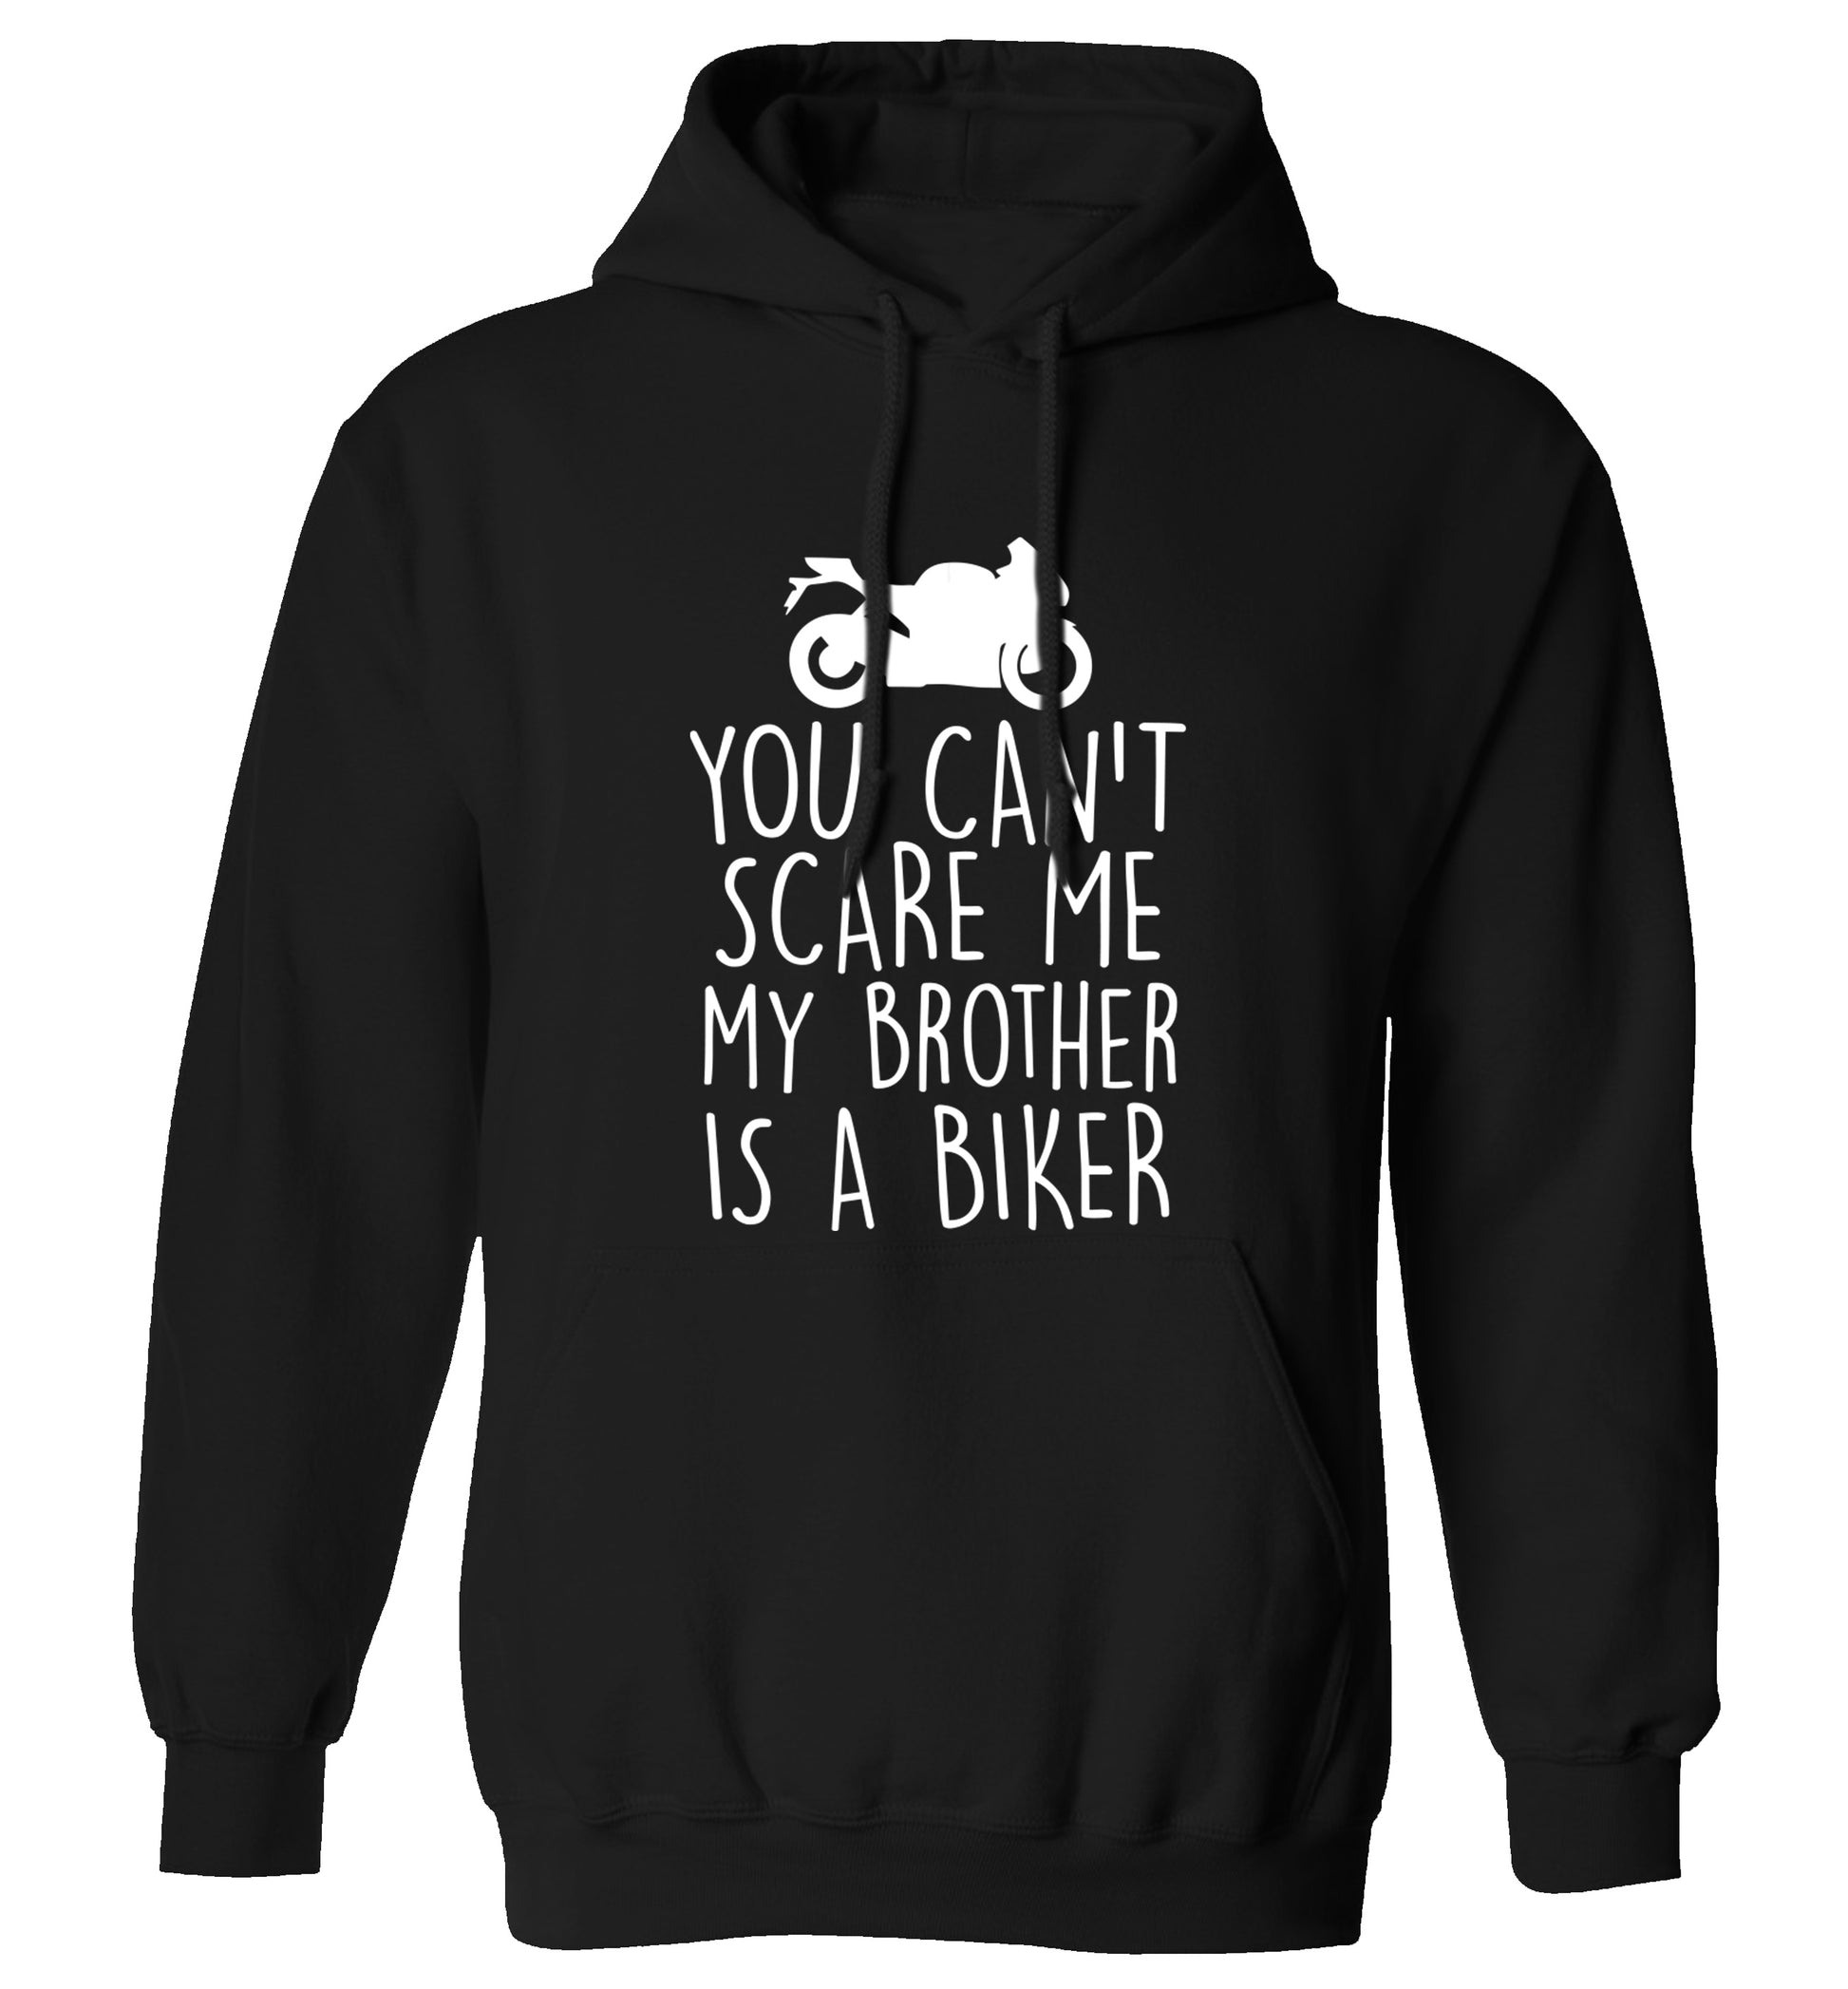 You can't scare me my brother is a biker adults unisex black hoodie 2XL